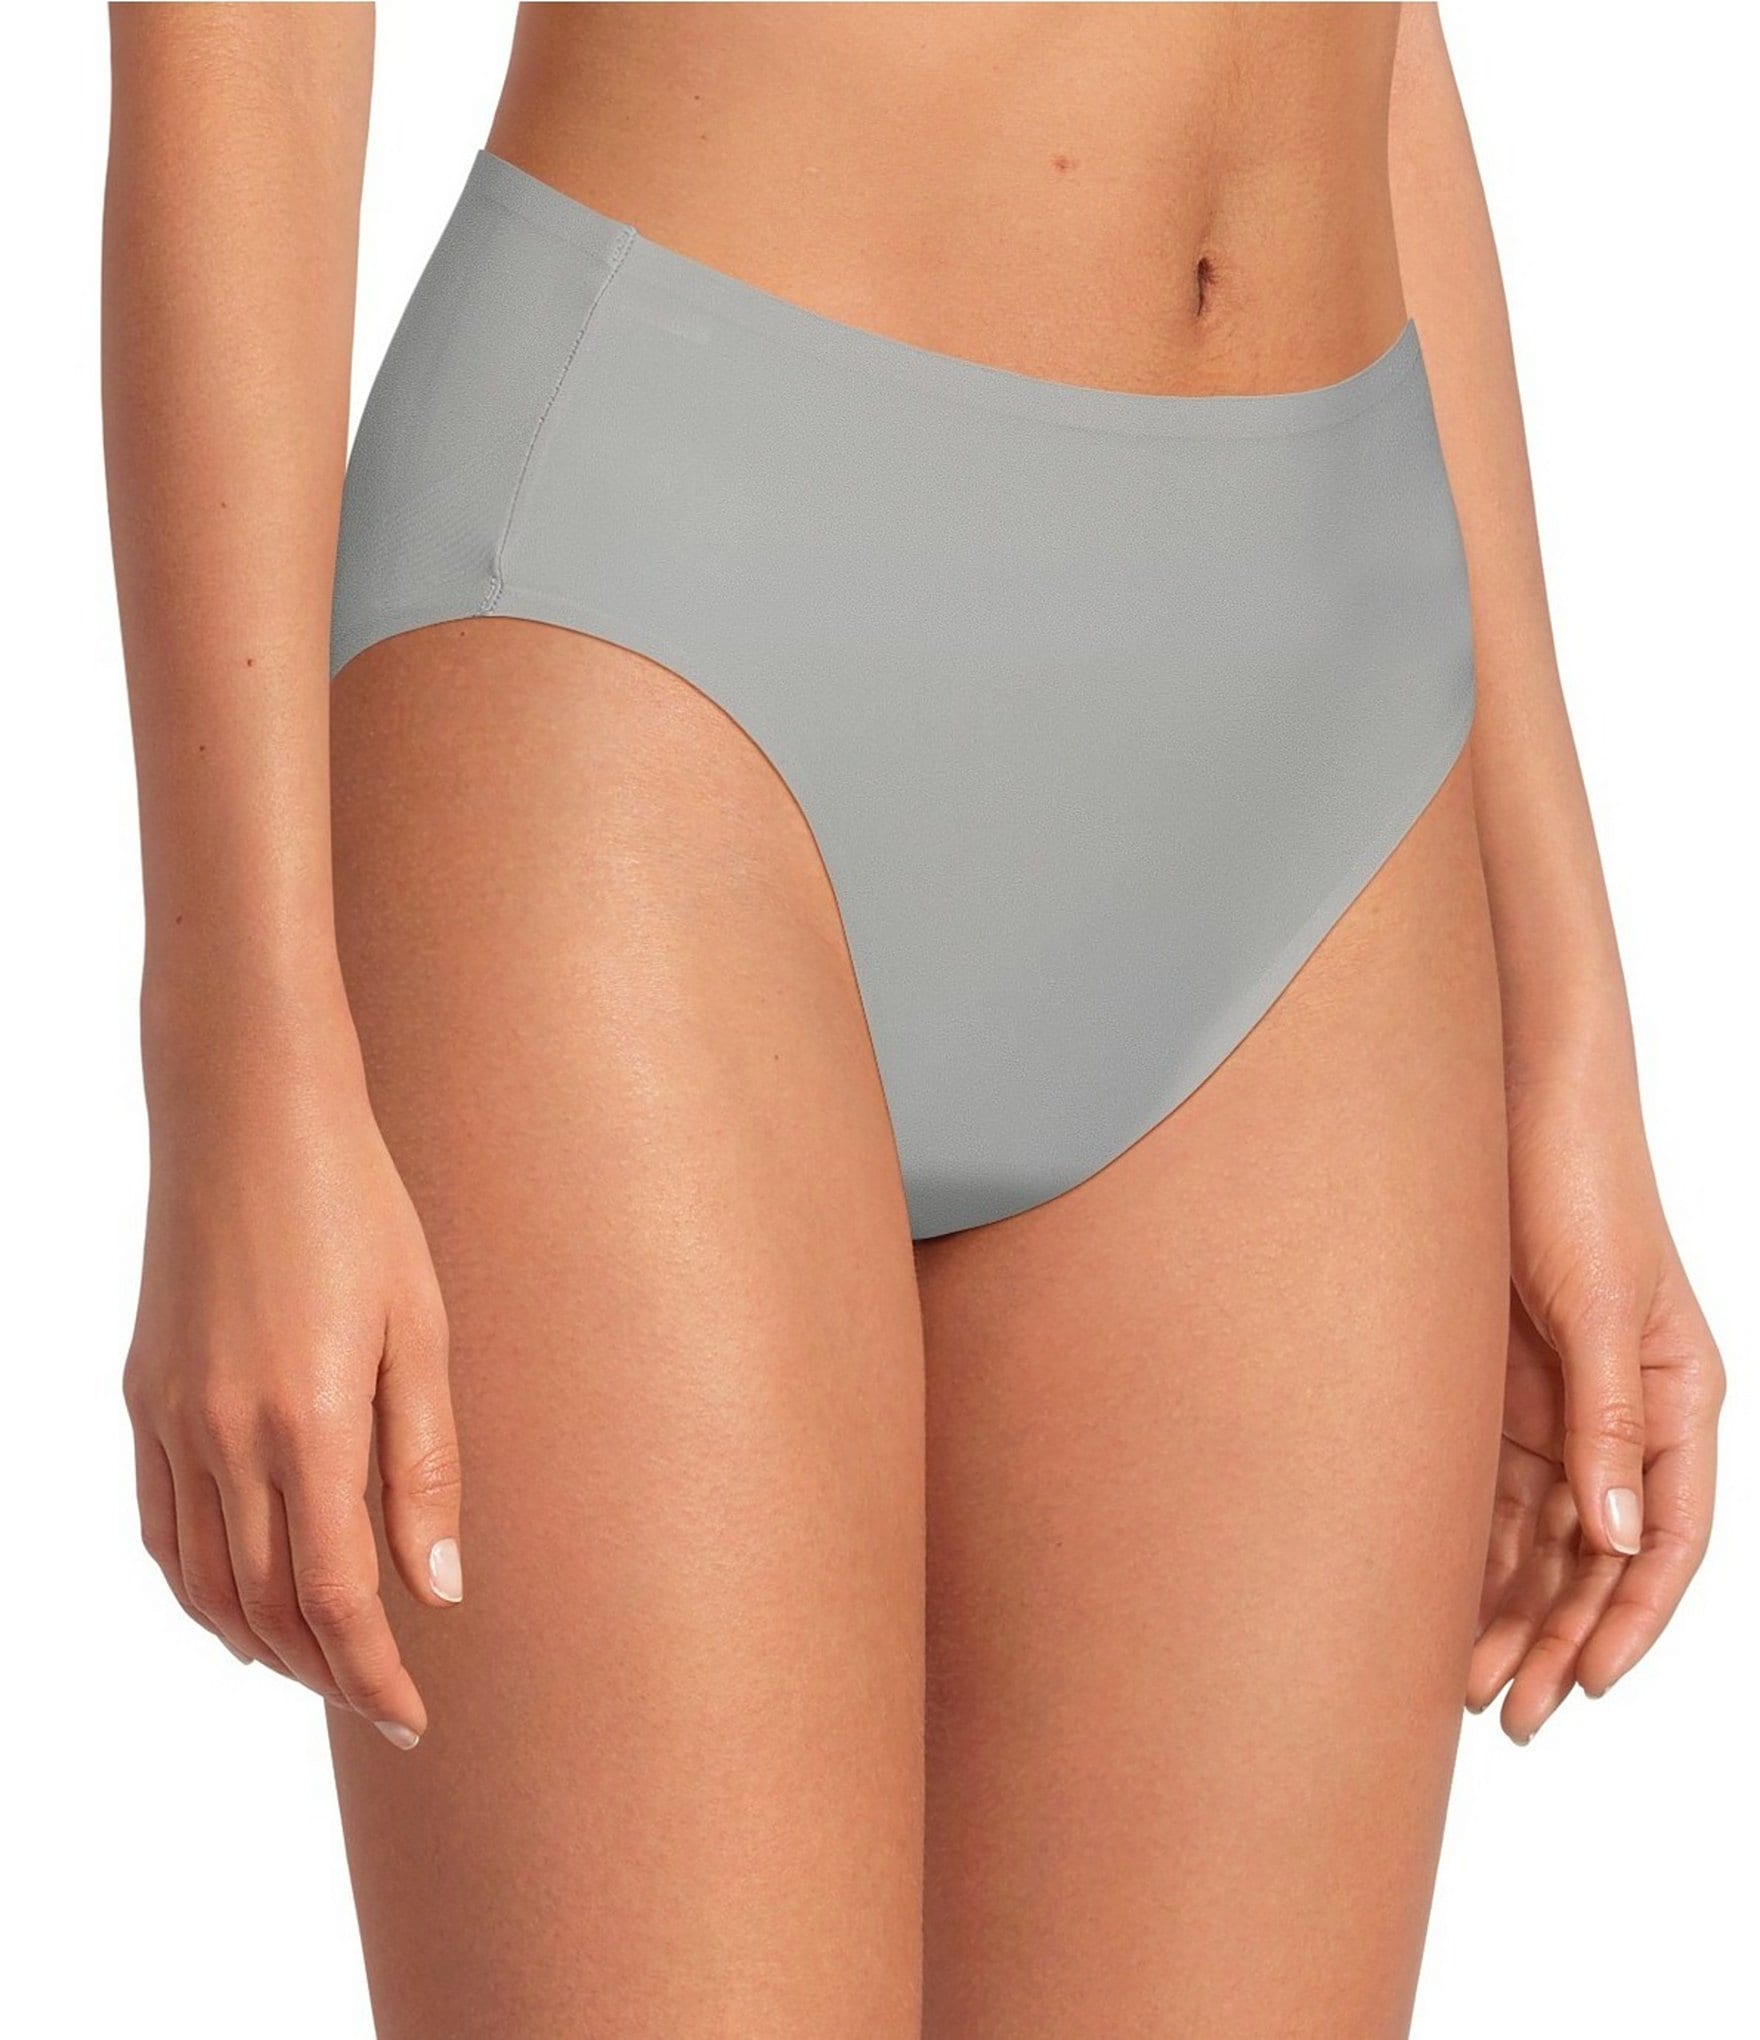 Women's Panties for sale in Chaguanas, Trinidad and Tobago